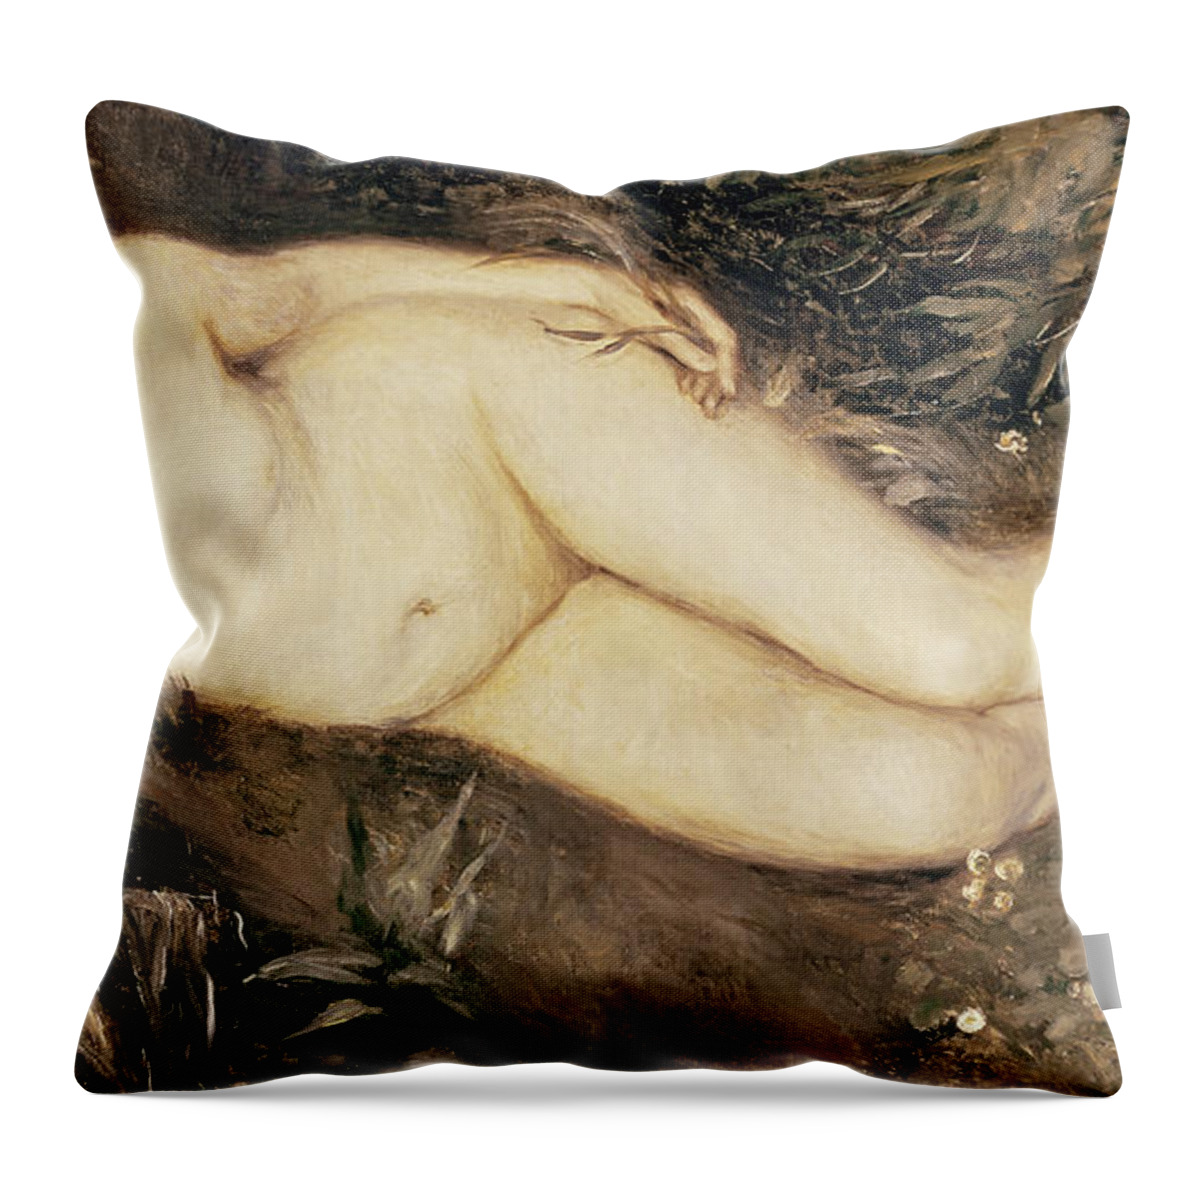 A Nymph By A Stream Throw Pillow featuring the painting A Nymph by a Stream by Pierre Auguste Renoir 